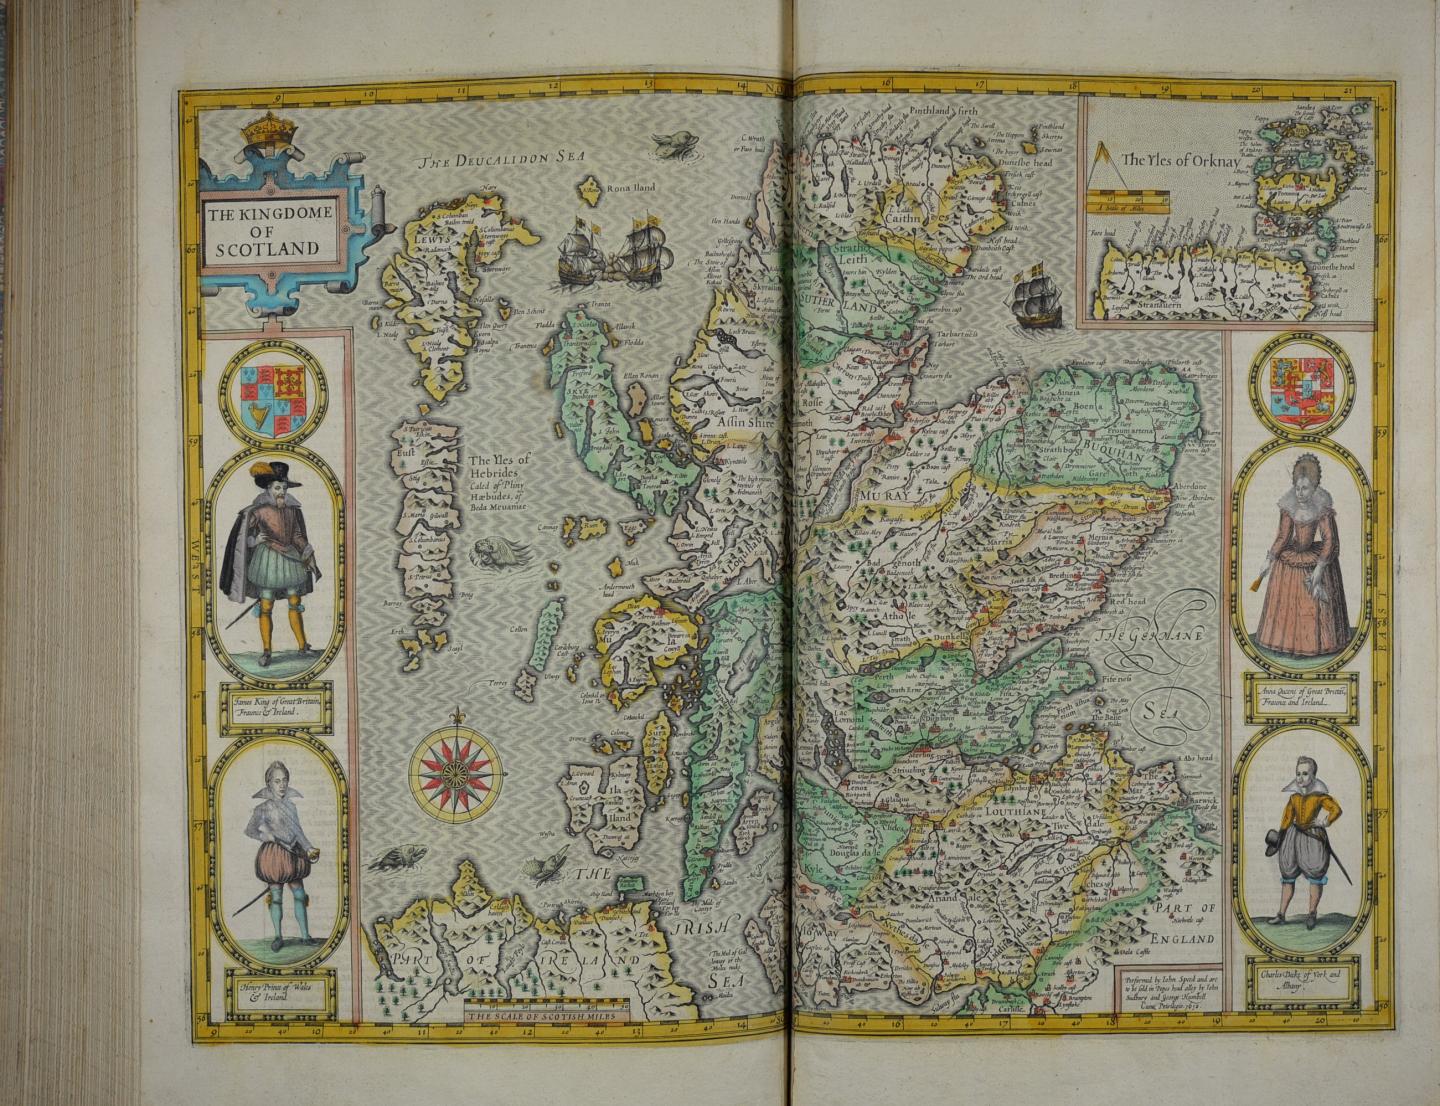 A historical map of Scotland decorated with portraits of James VI & I, Queen Anne and Princes Henry and Charles